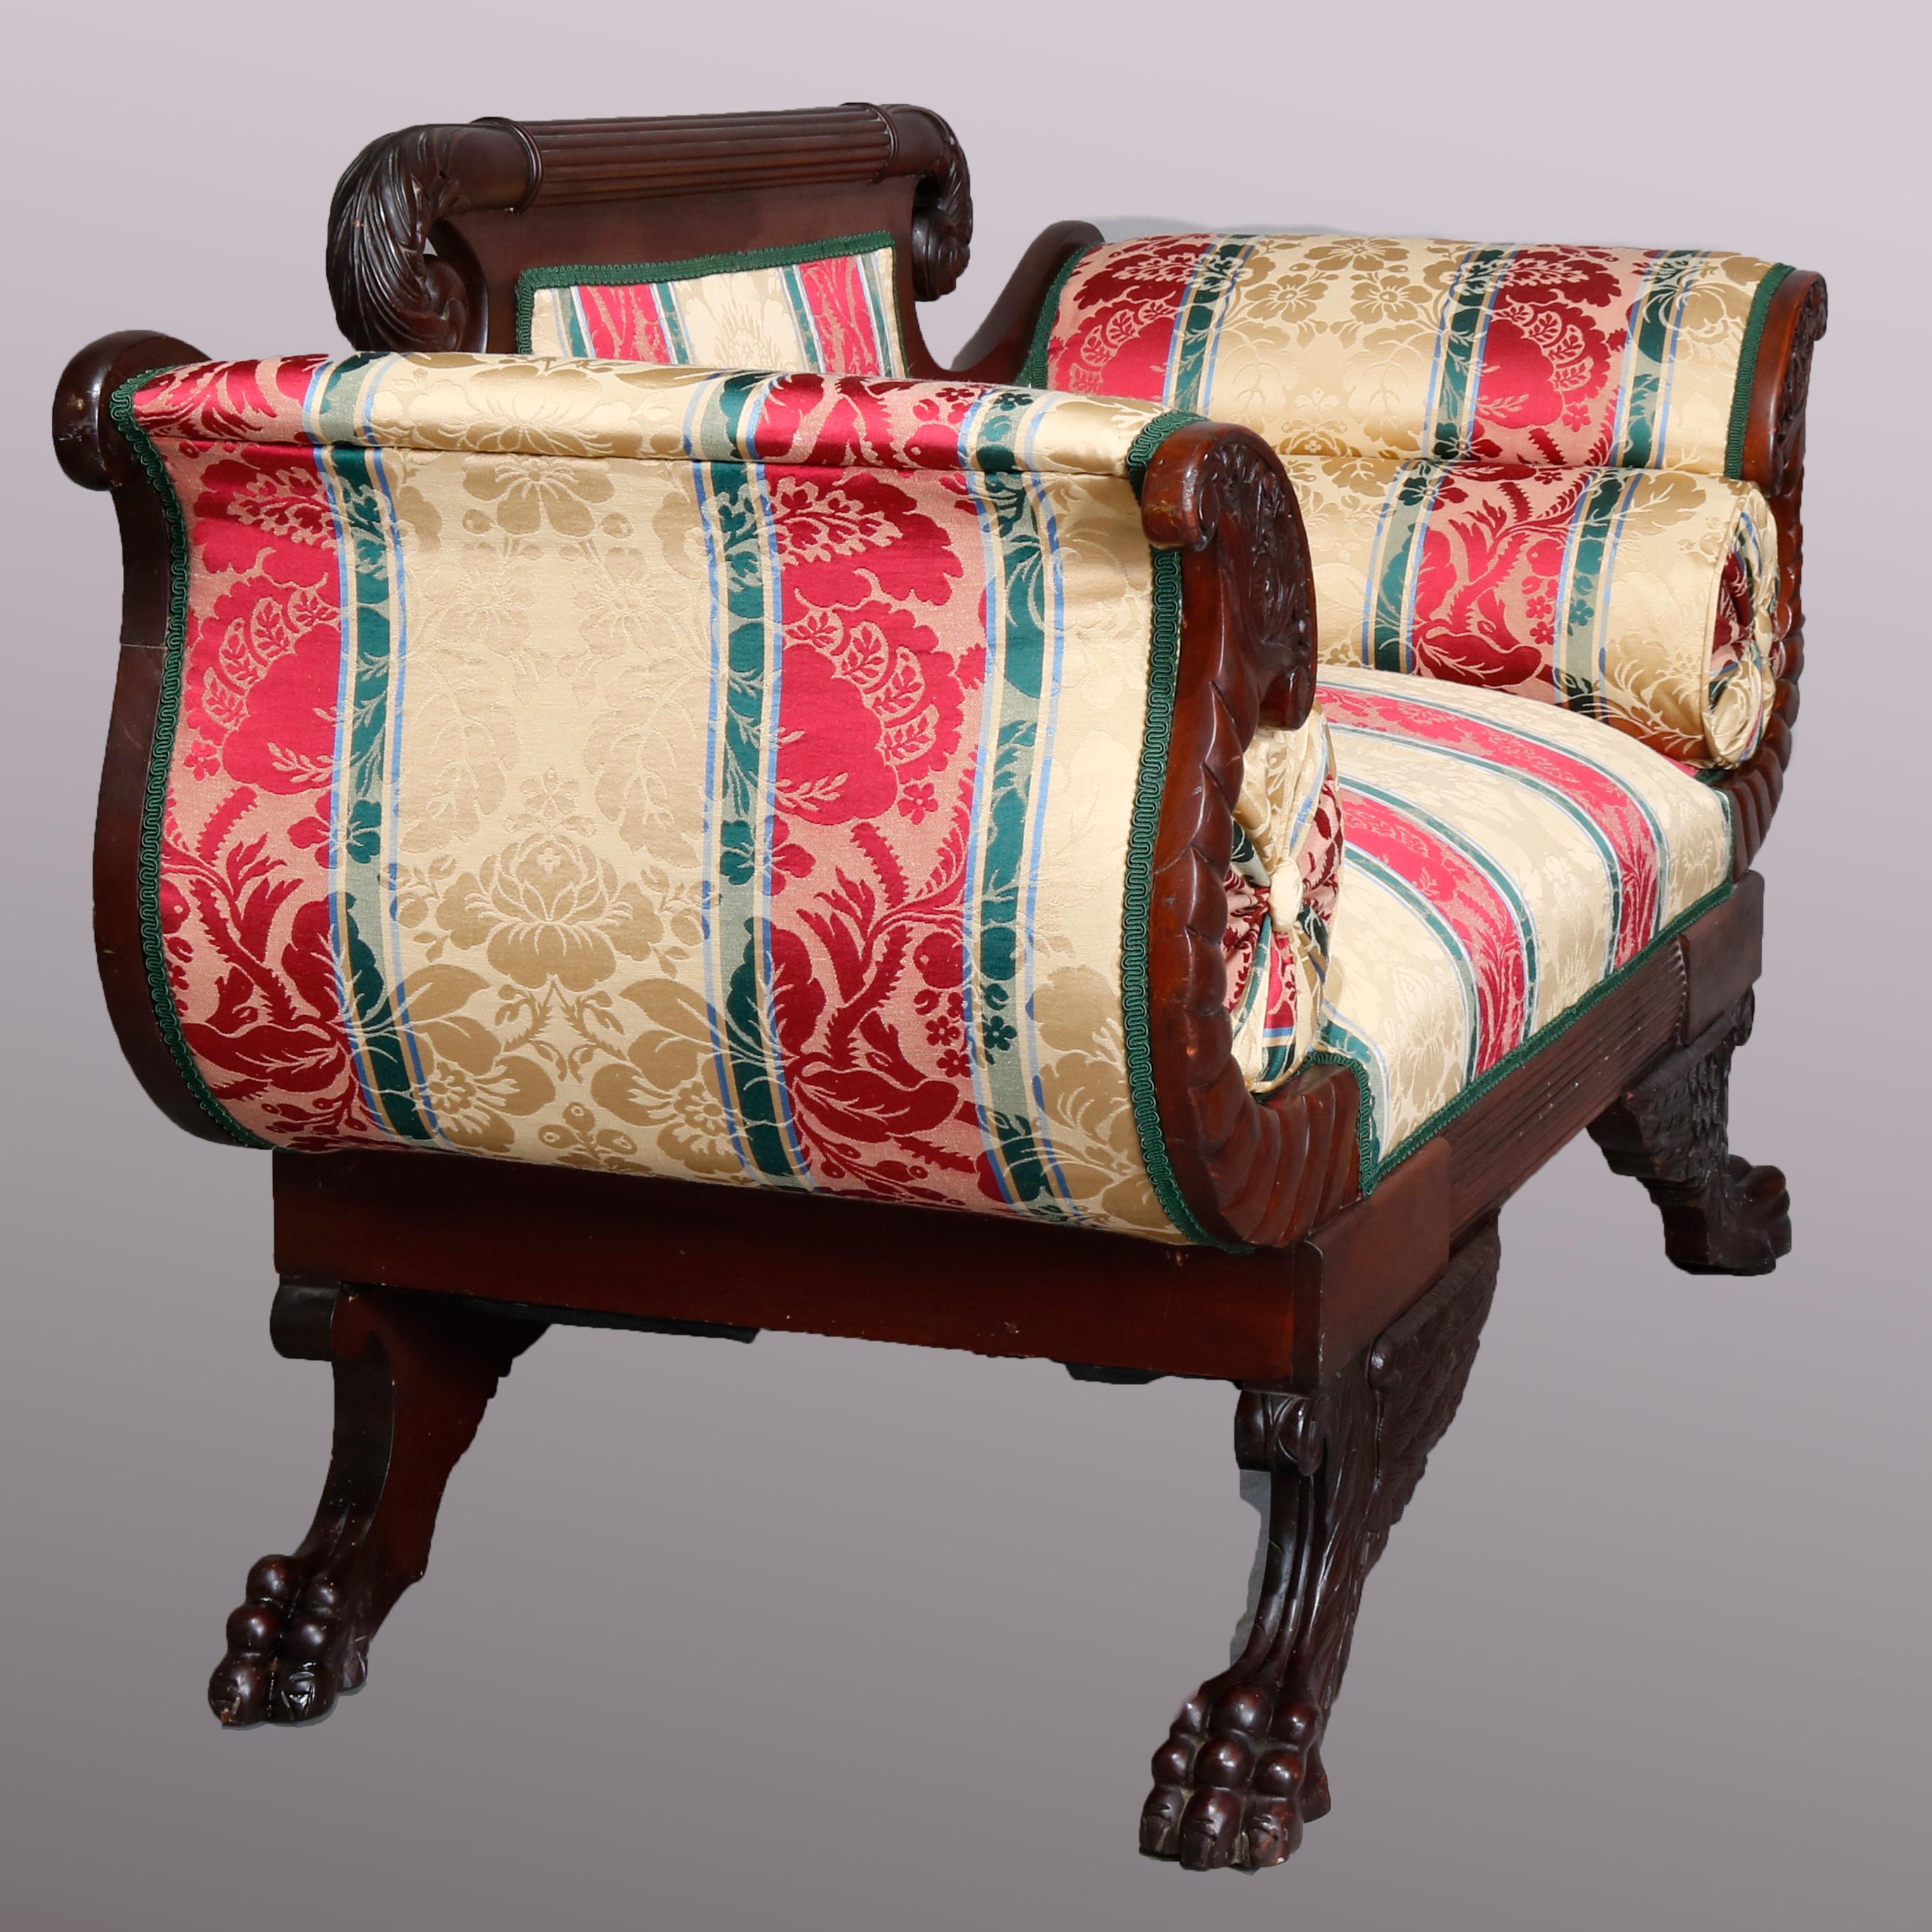 19th Century Antique Classical American Empire Carved Flame Mahogany Settee, circa 1830